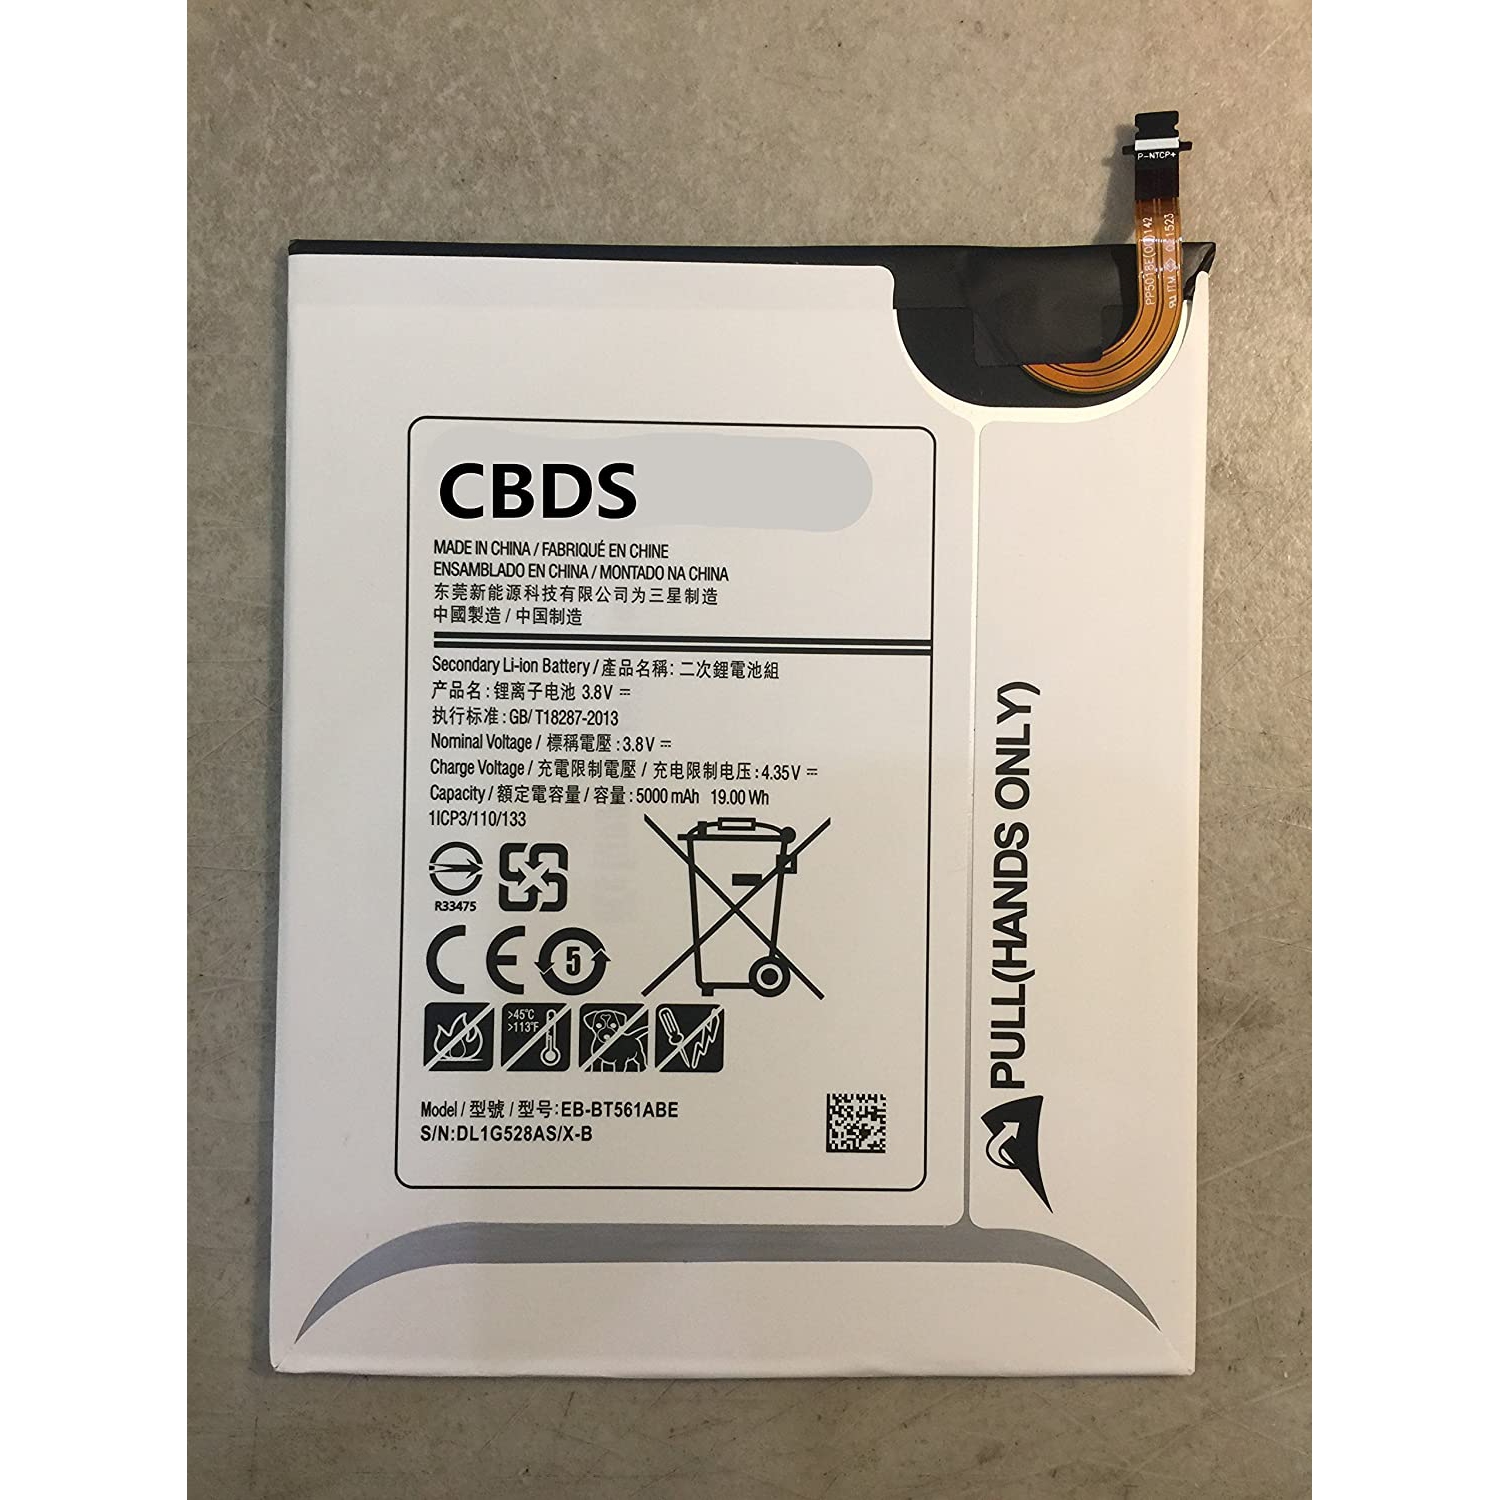 (CBDS) 5000mAh, 19.0 Wh Replacement Battery - Compatible with Samsung Galaxy Tab E 9.6 T560 T561 SM-T560 EB-BT561ABE in